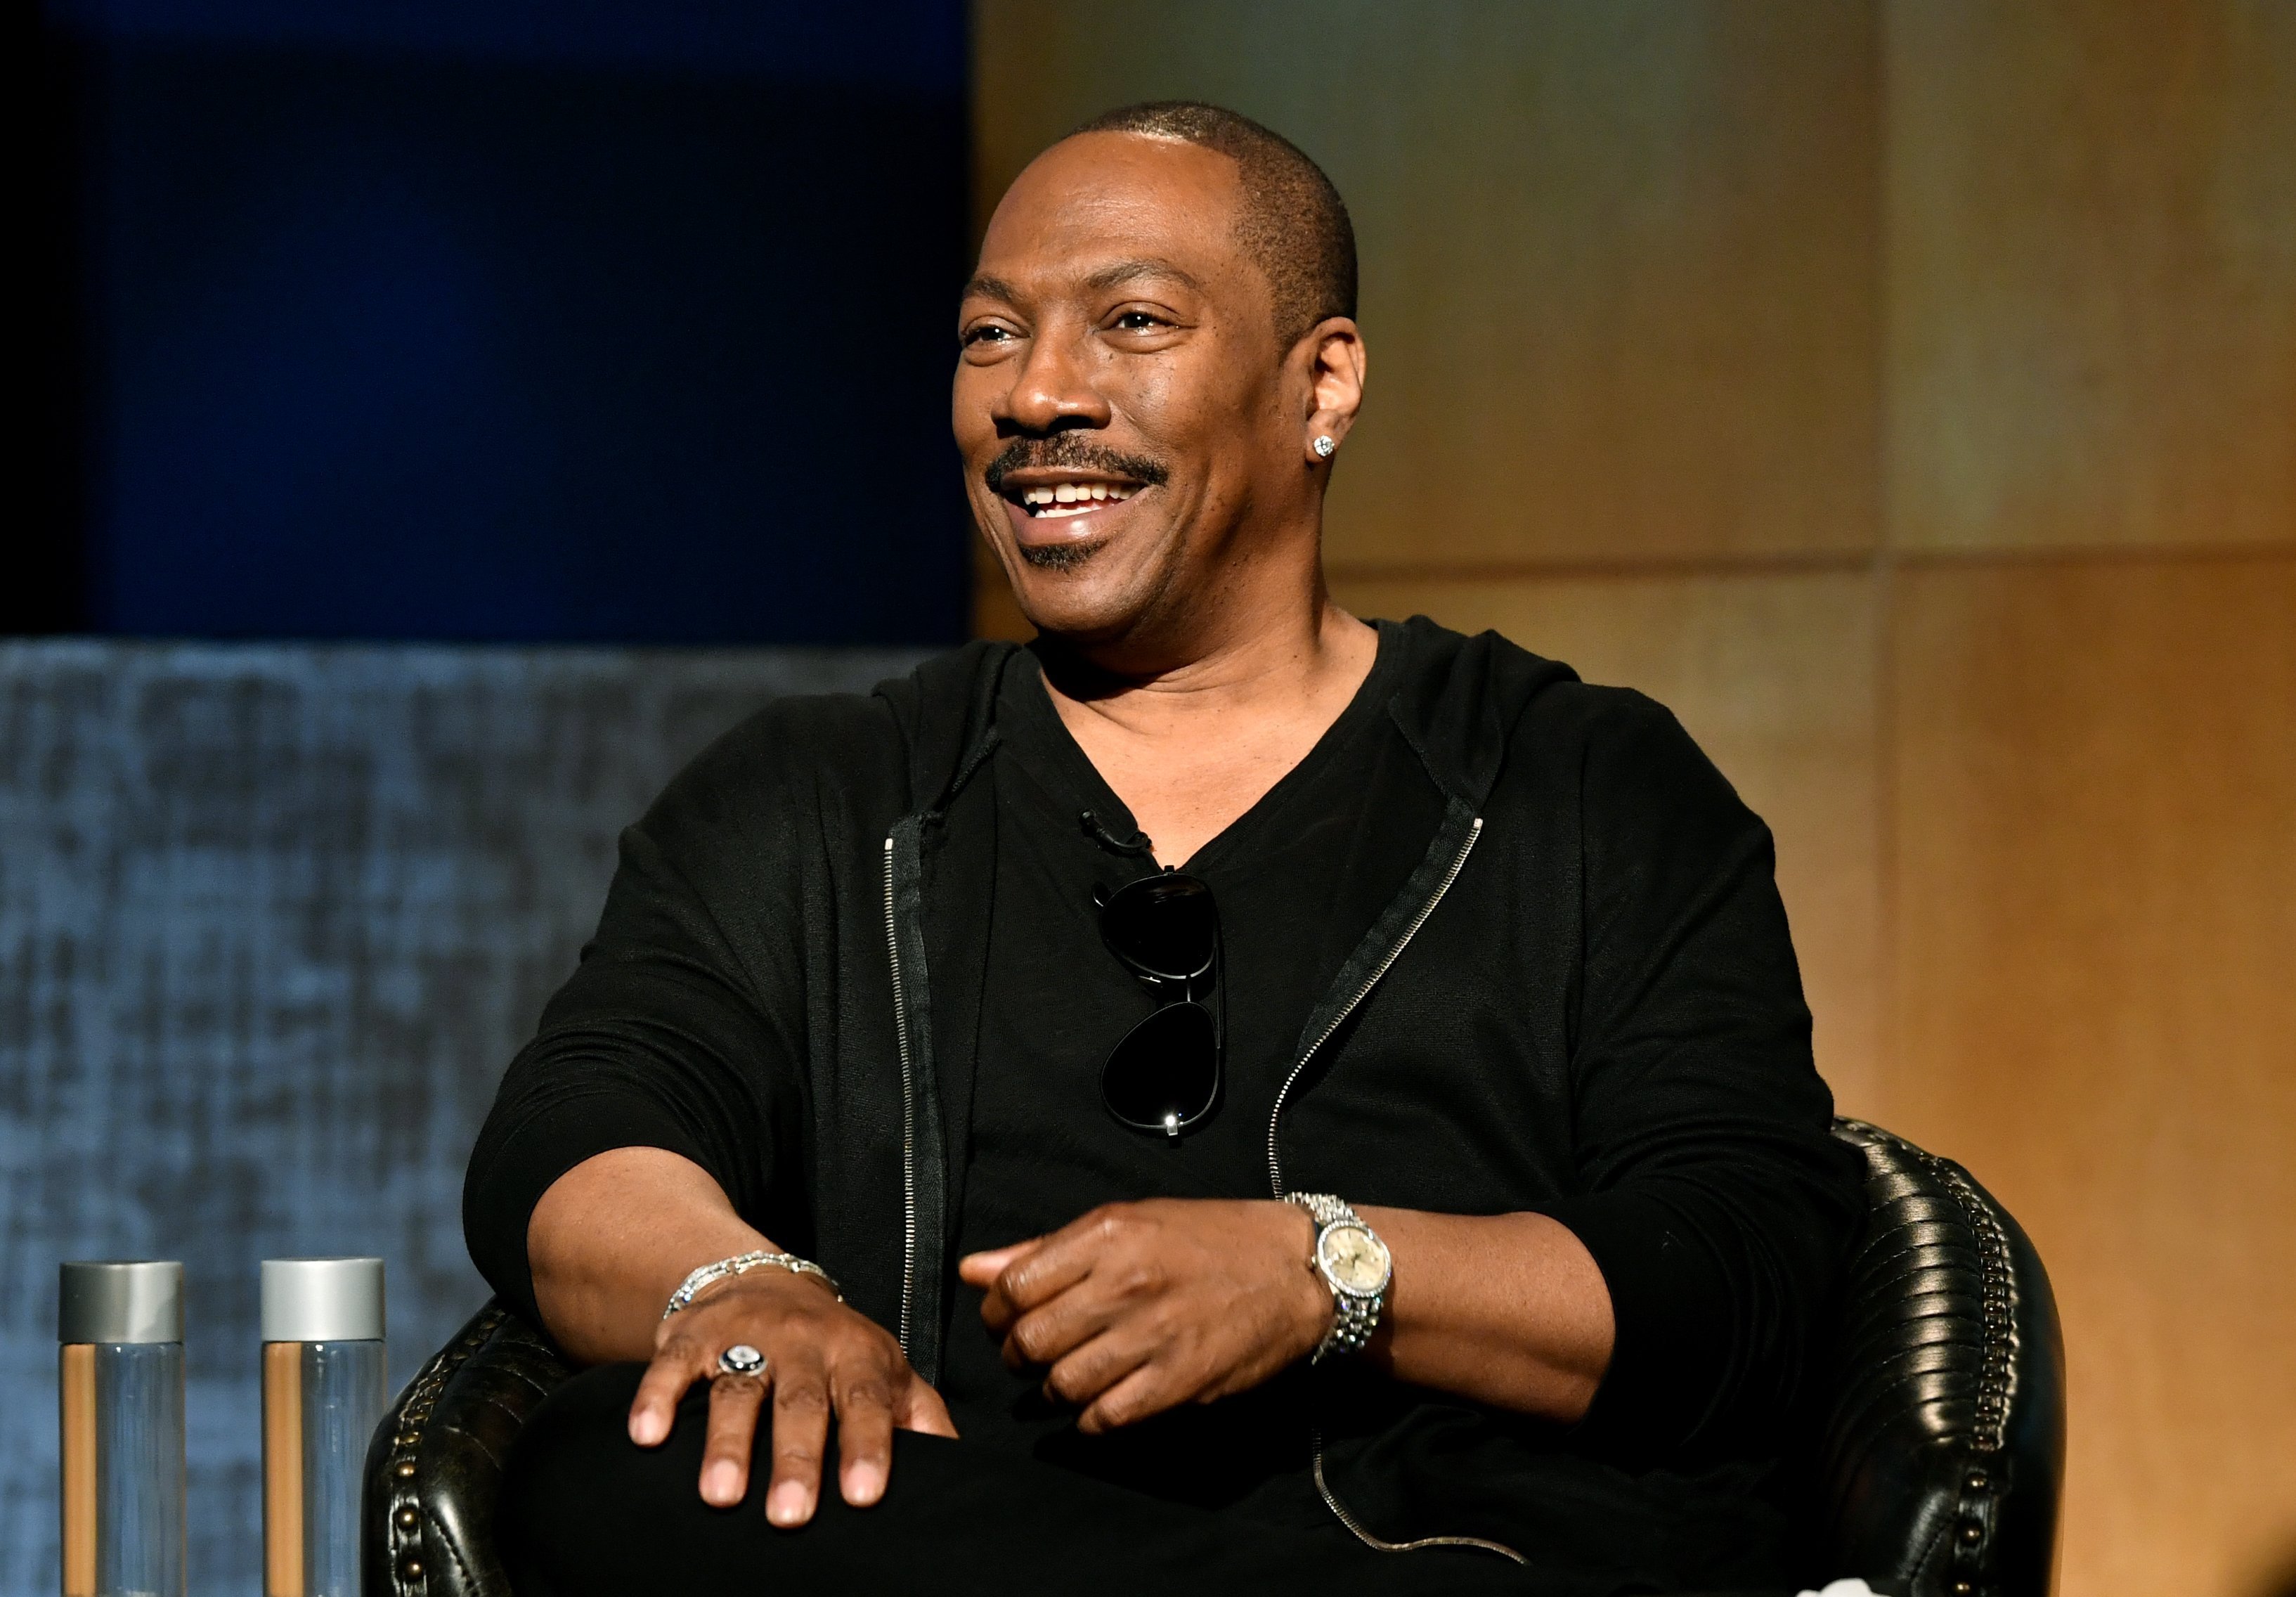 Eddie Murphy at the LA Tastemaker event for "Comedians in Cars" on July 17, 2019 in Beverly Hills, California | Photo Getty Images